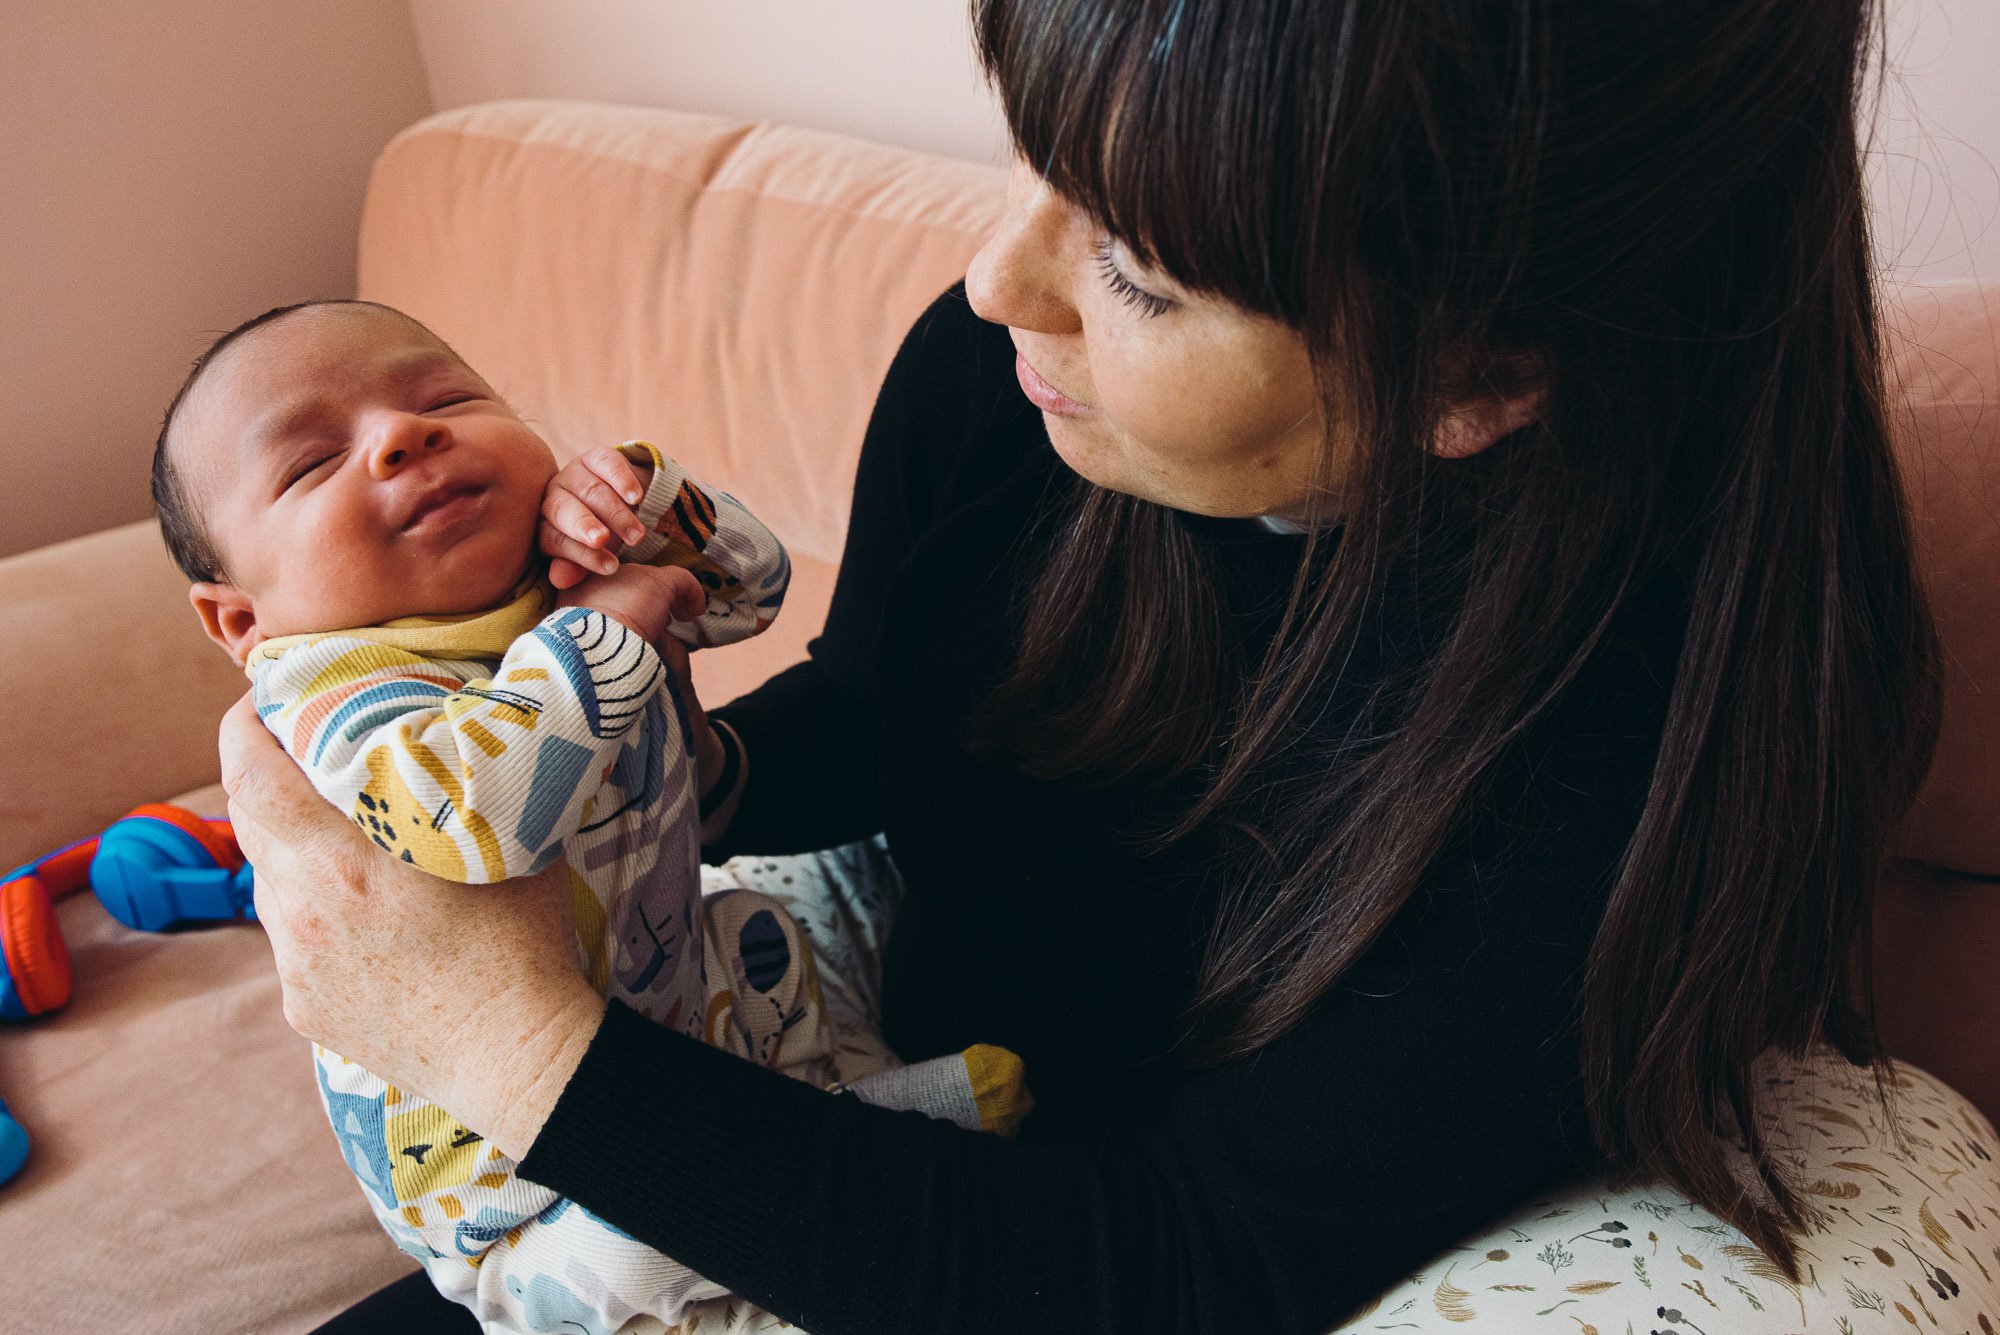 natural-newborn-photographer-relaxed-at-home-session-mum-newborn-son-sofa-at-home-sussex-brighton-hove.jpg